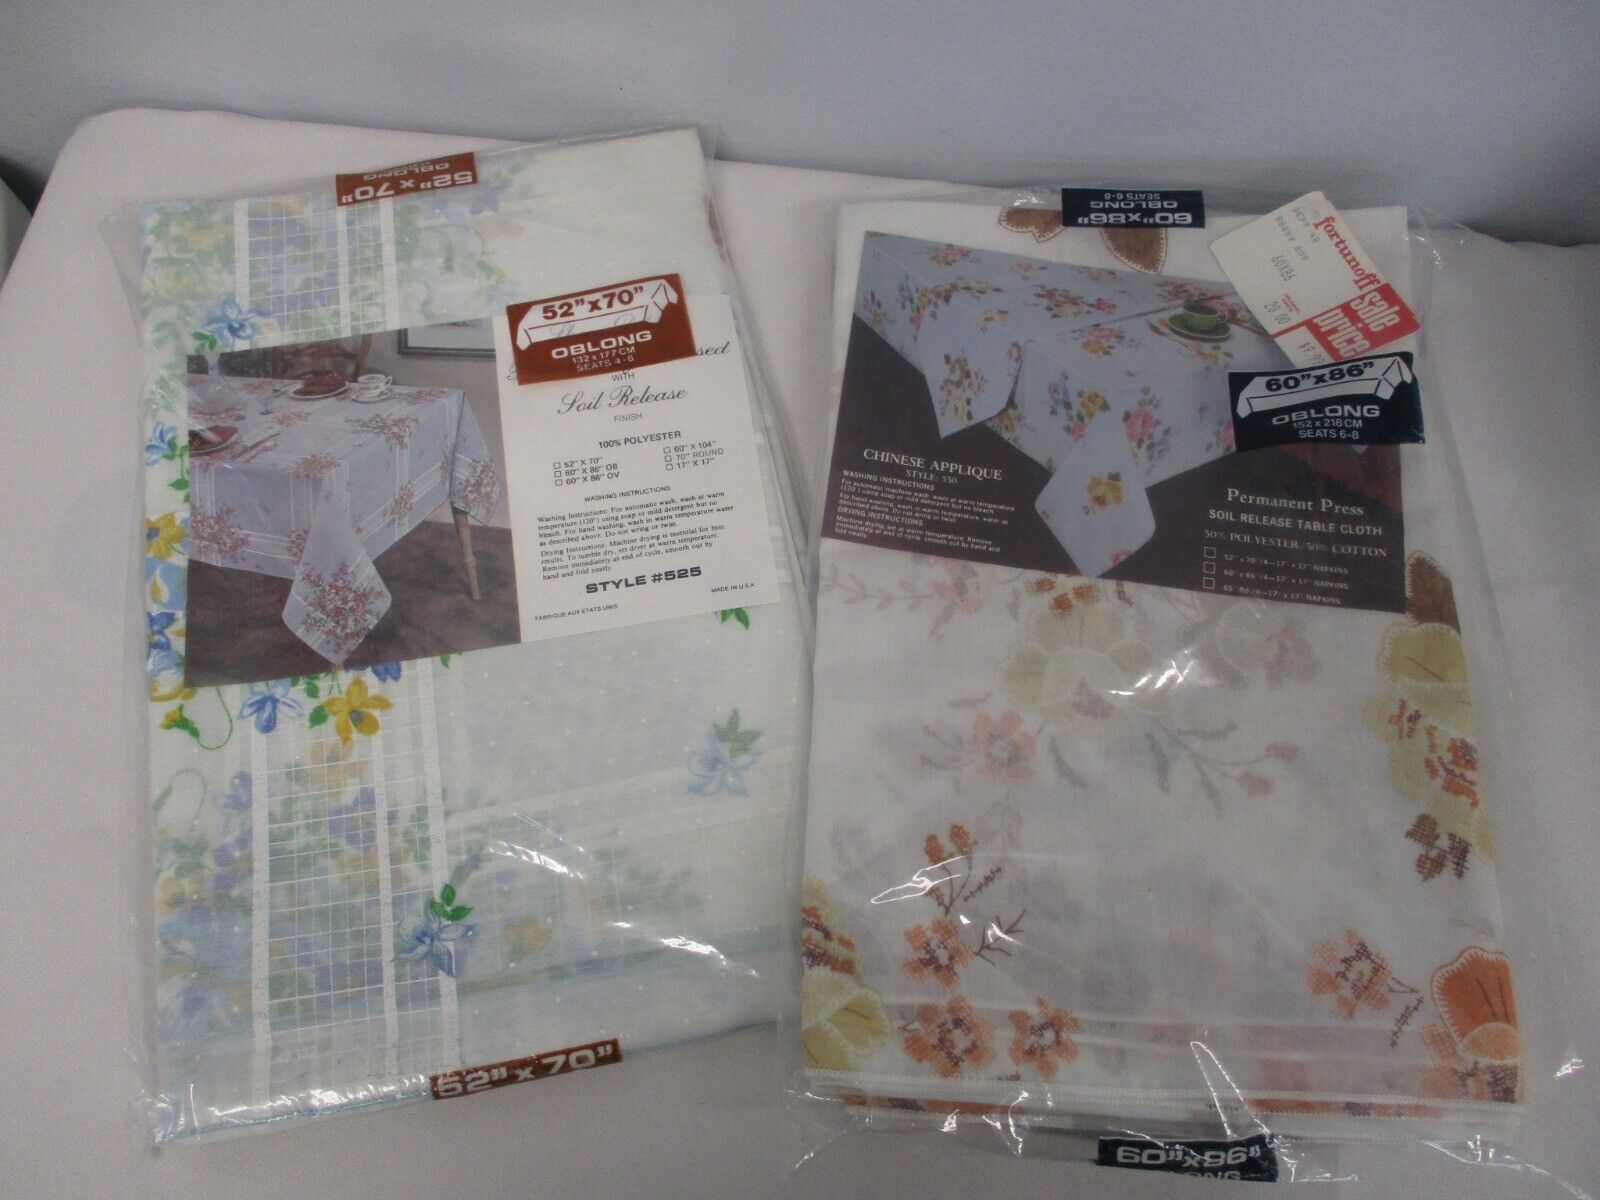 2 1980s NEW FORTUNOFF PERMANENT PRESS SOIL RELEASE TABLECLOTHS w FLOWERS 70